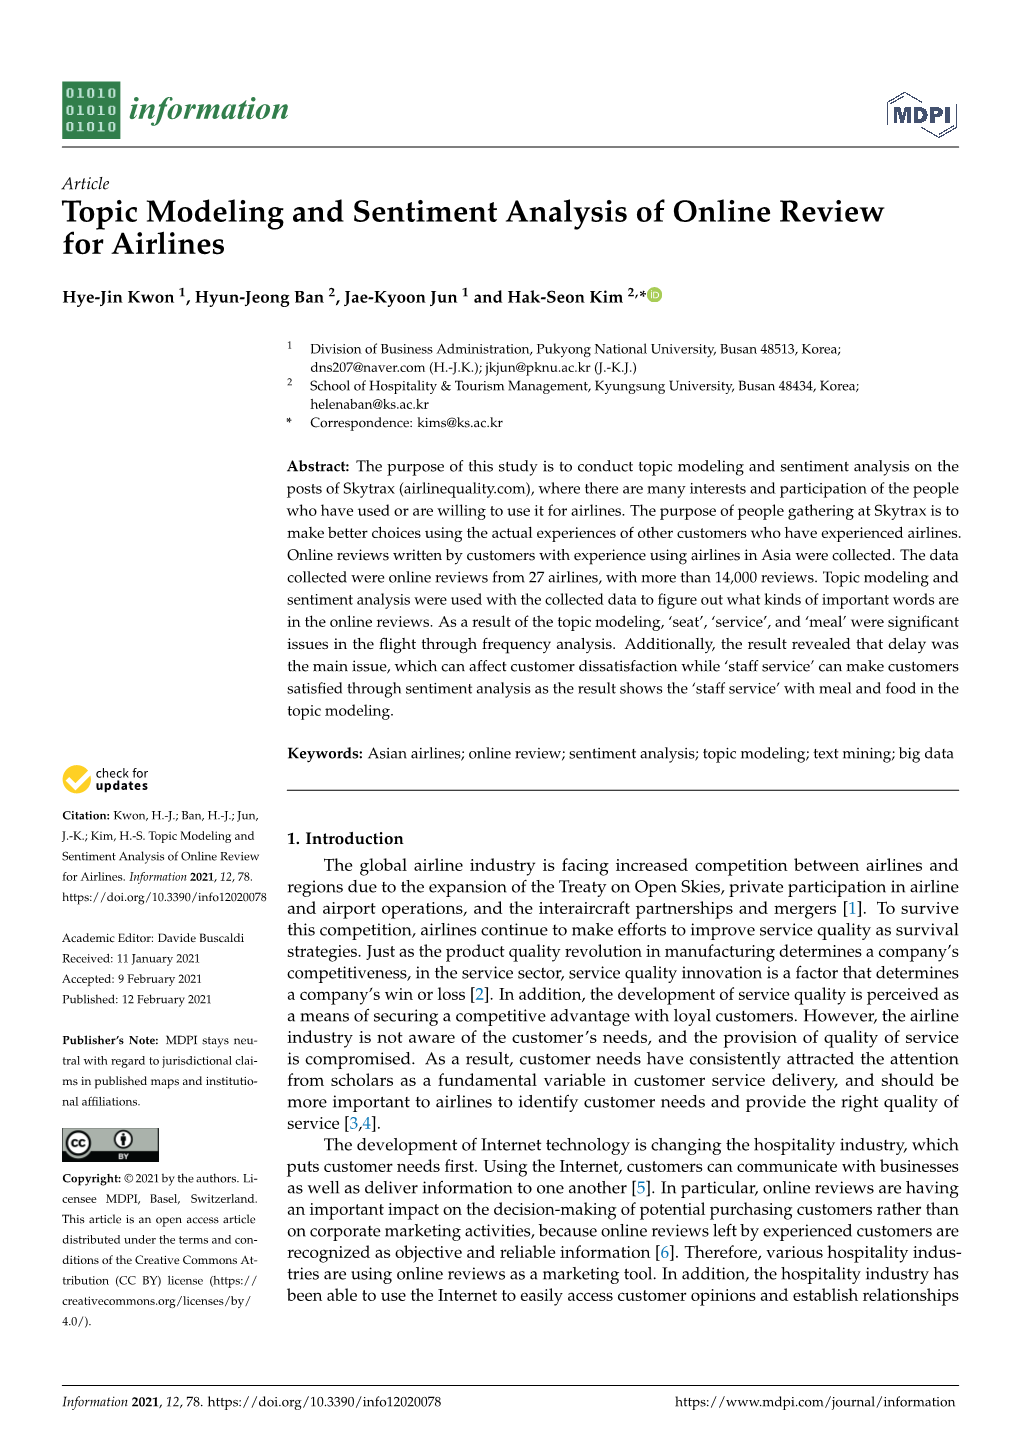 Topic Modeling and Sentiment Analysis of Online Review for Airlines